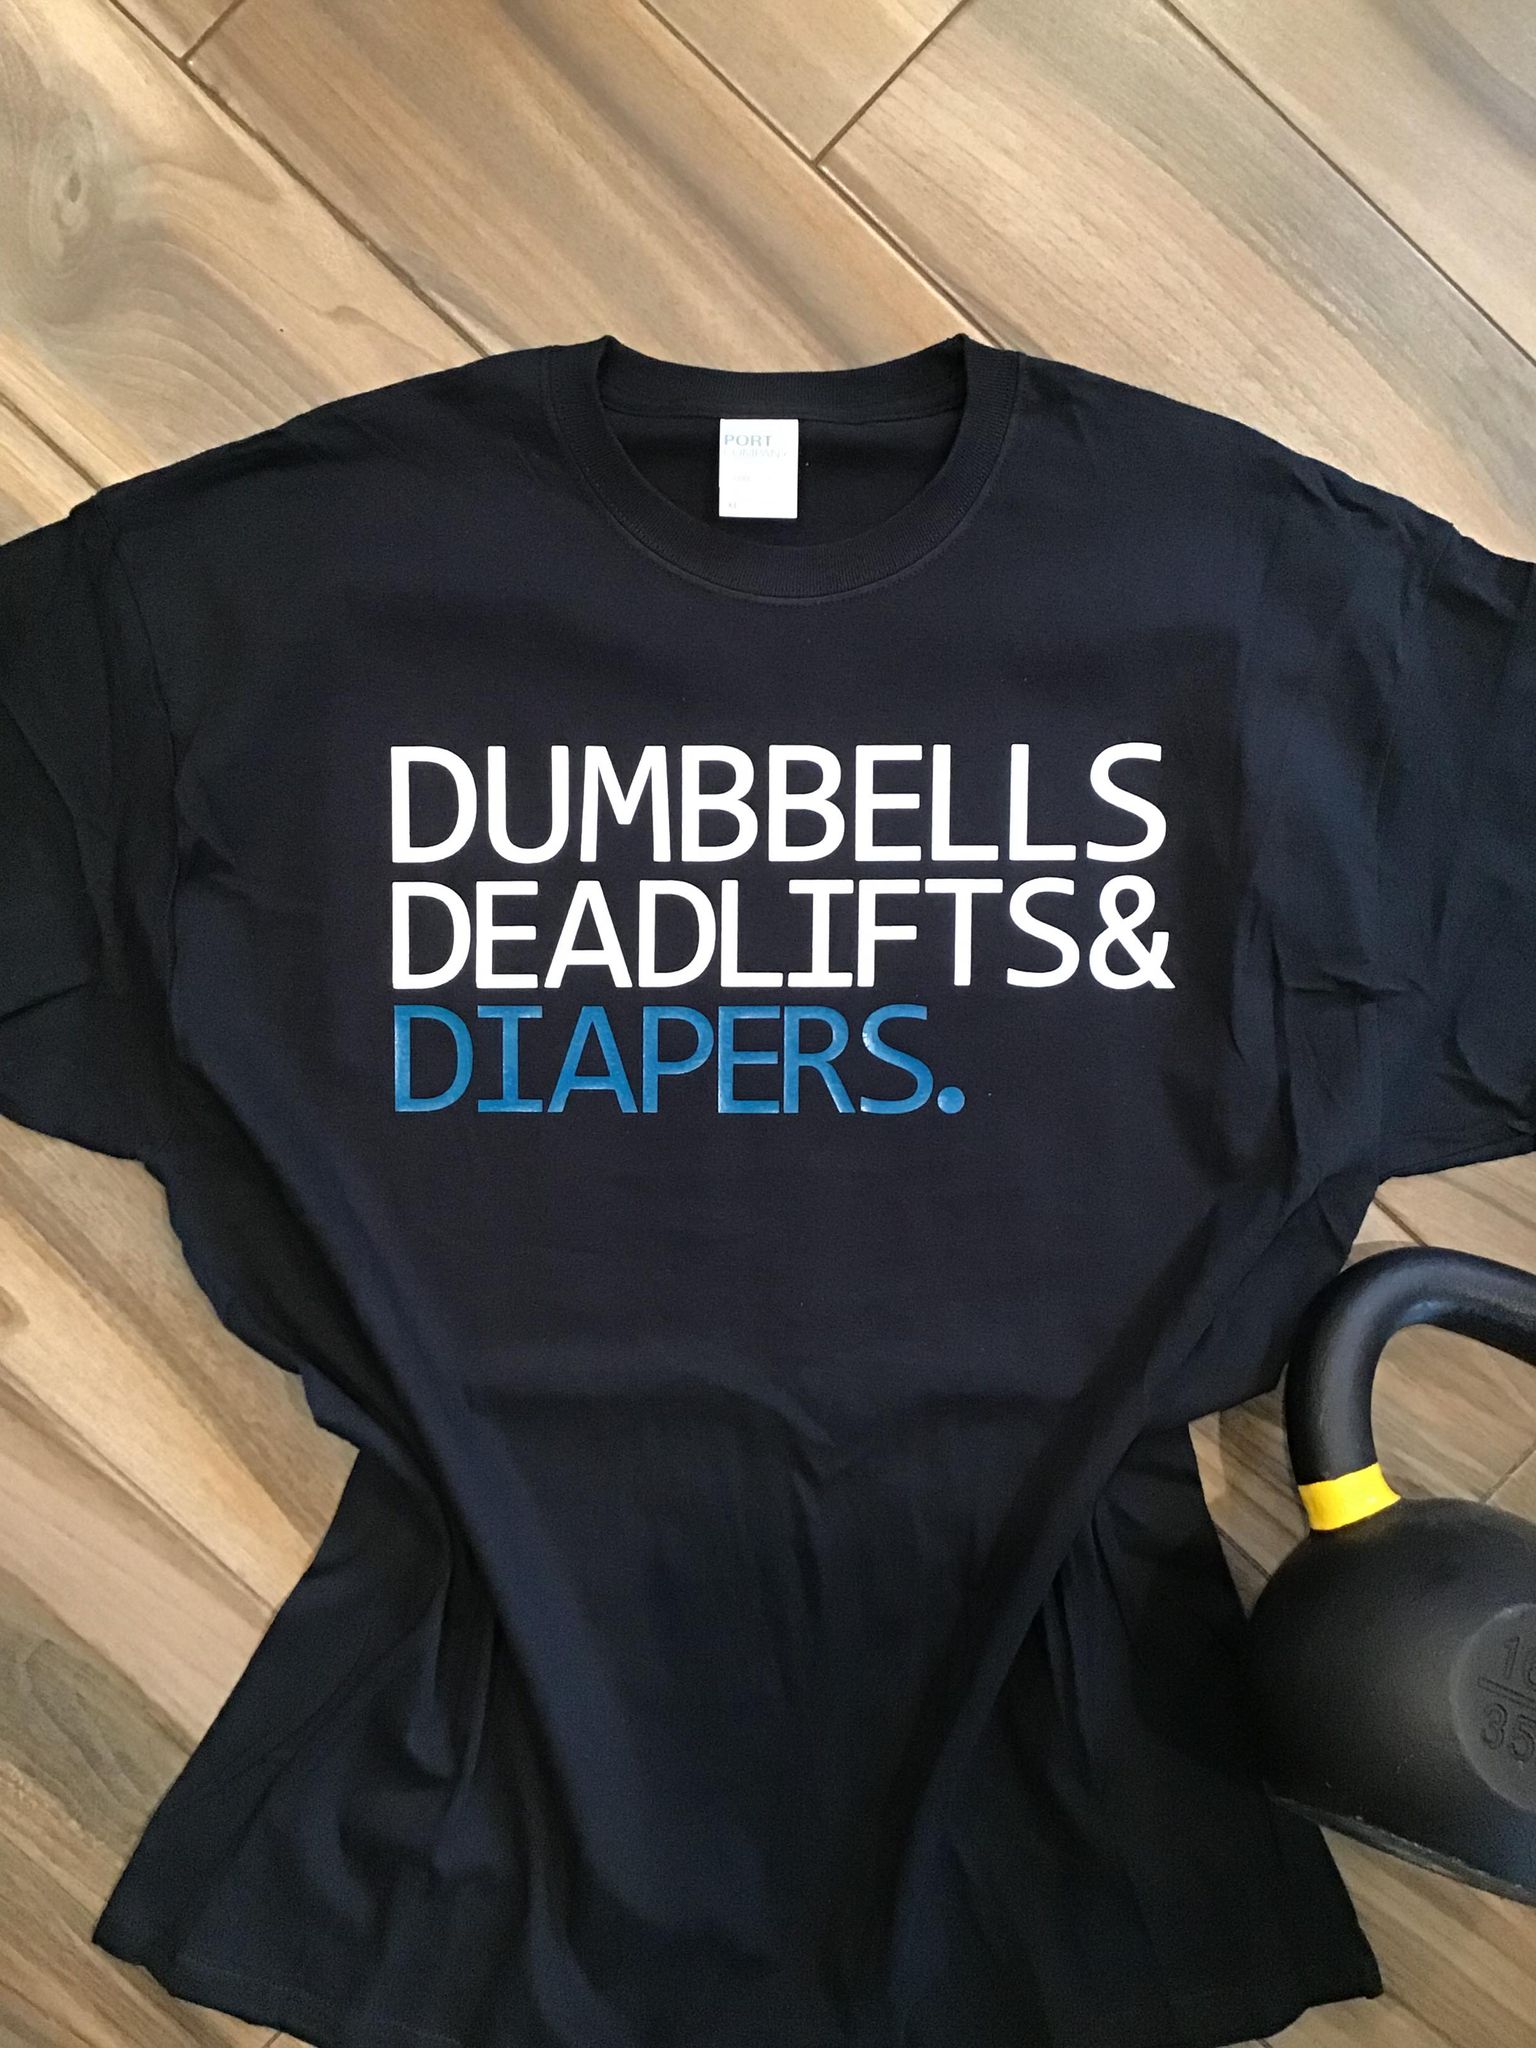 Dumbbells Deadlifts and Diapers